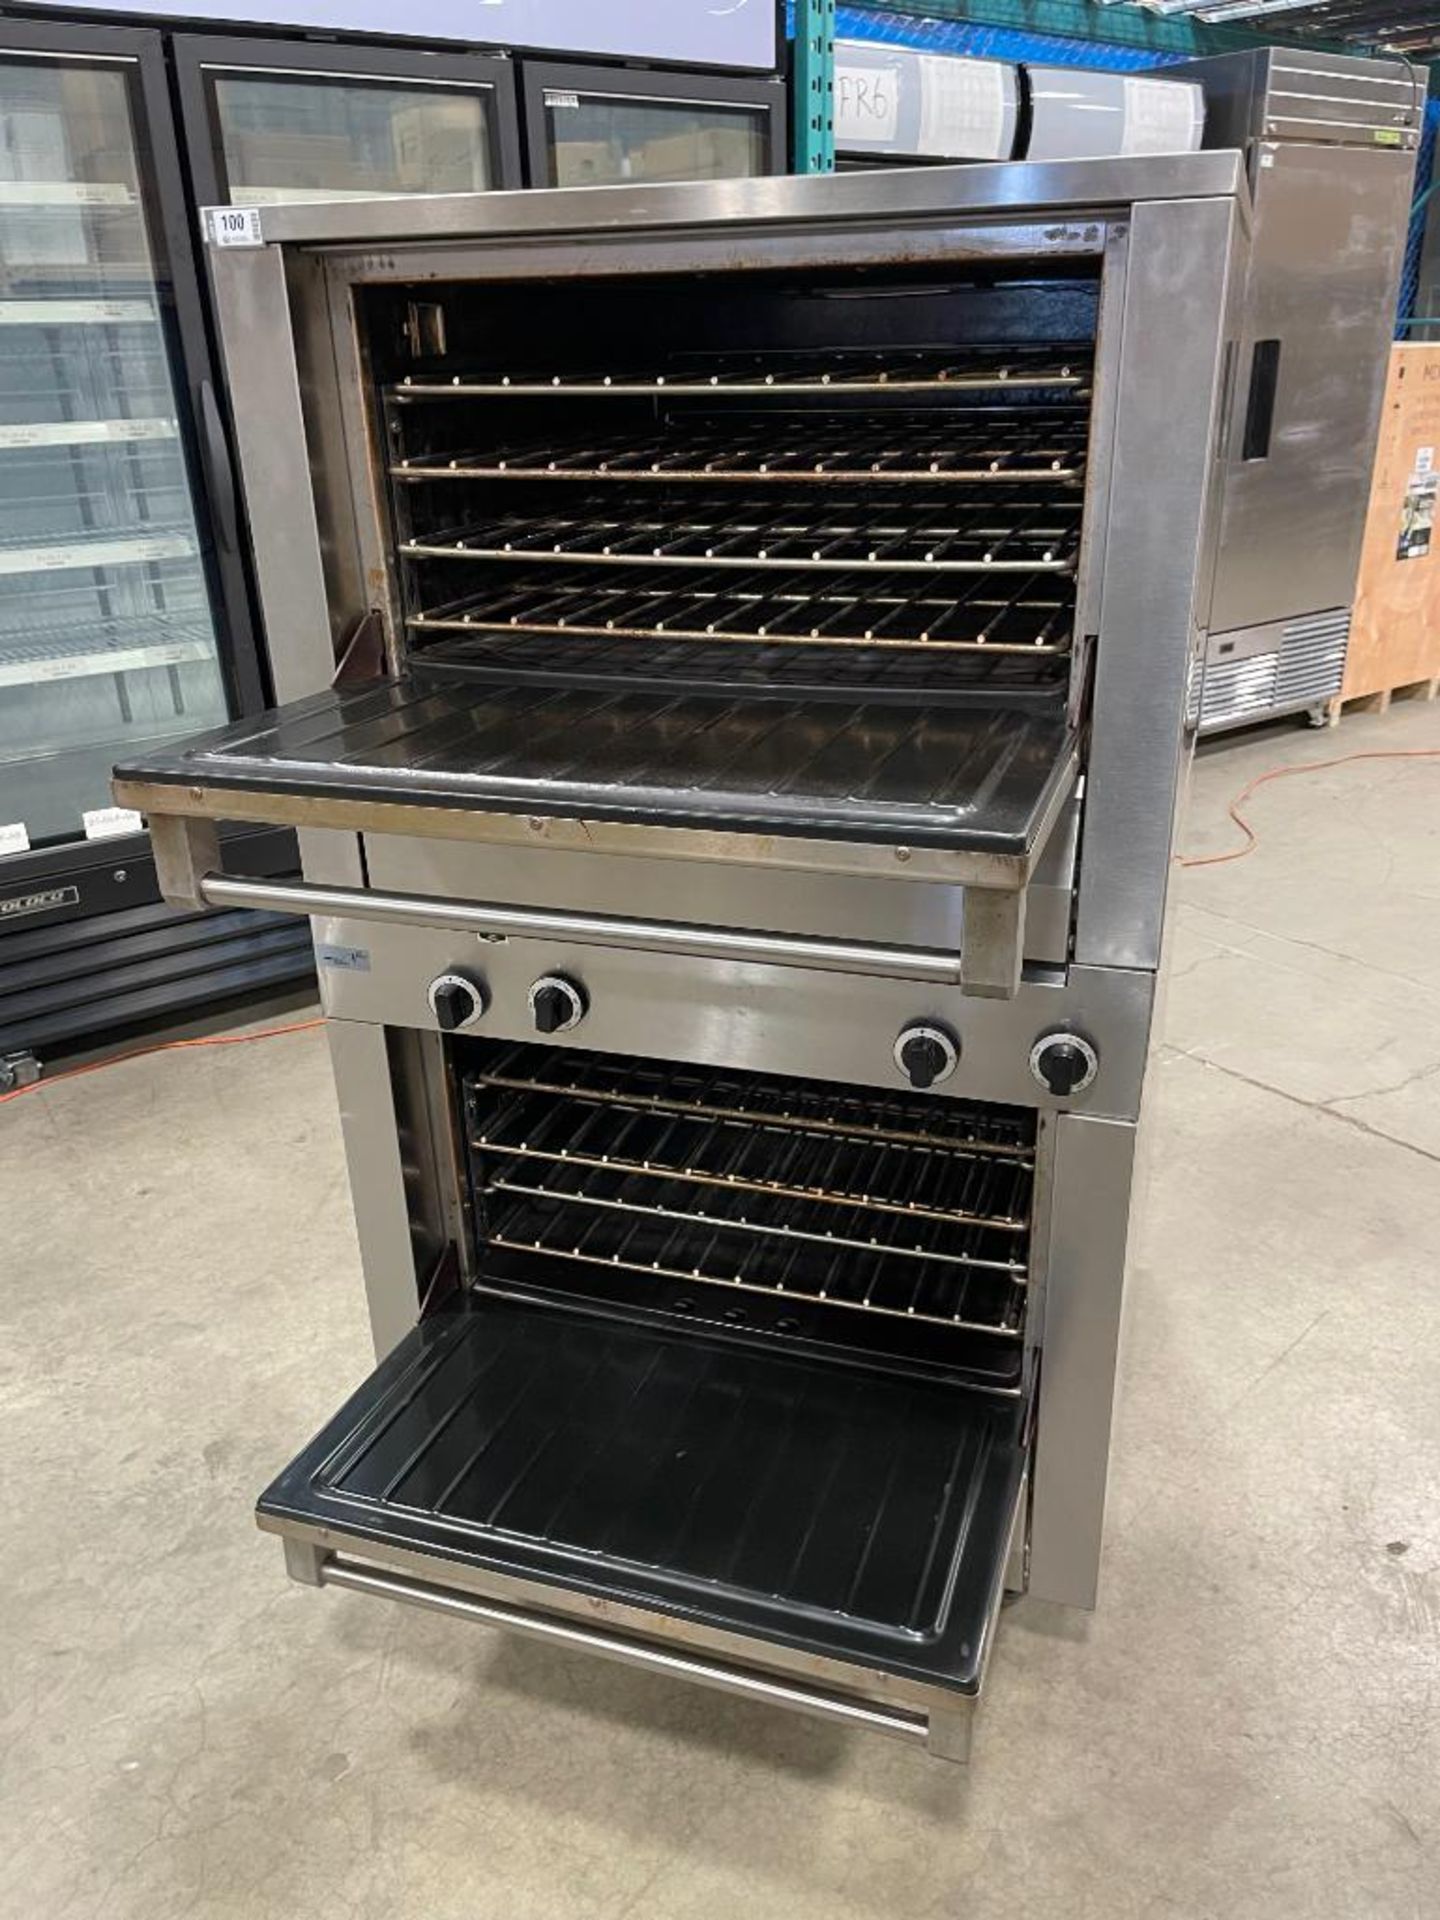 GARLAND M2R MASTER SERIES HEAVY DUTY NATURAL GAS DOUBLE OVEN - Image 2 of 14